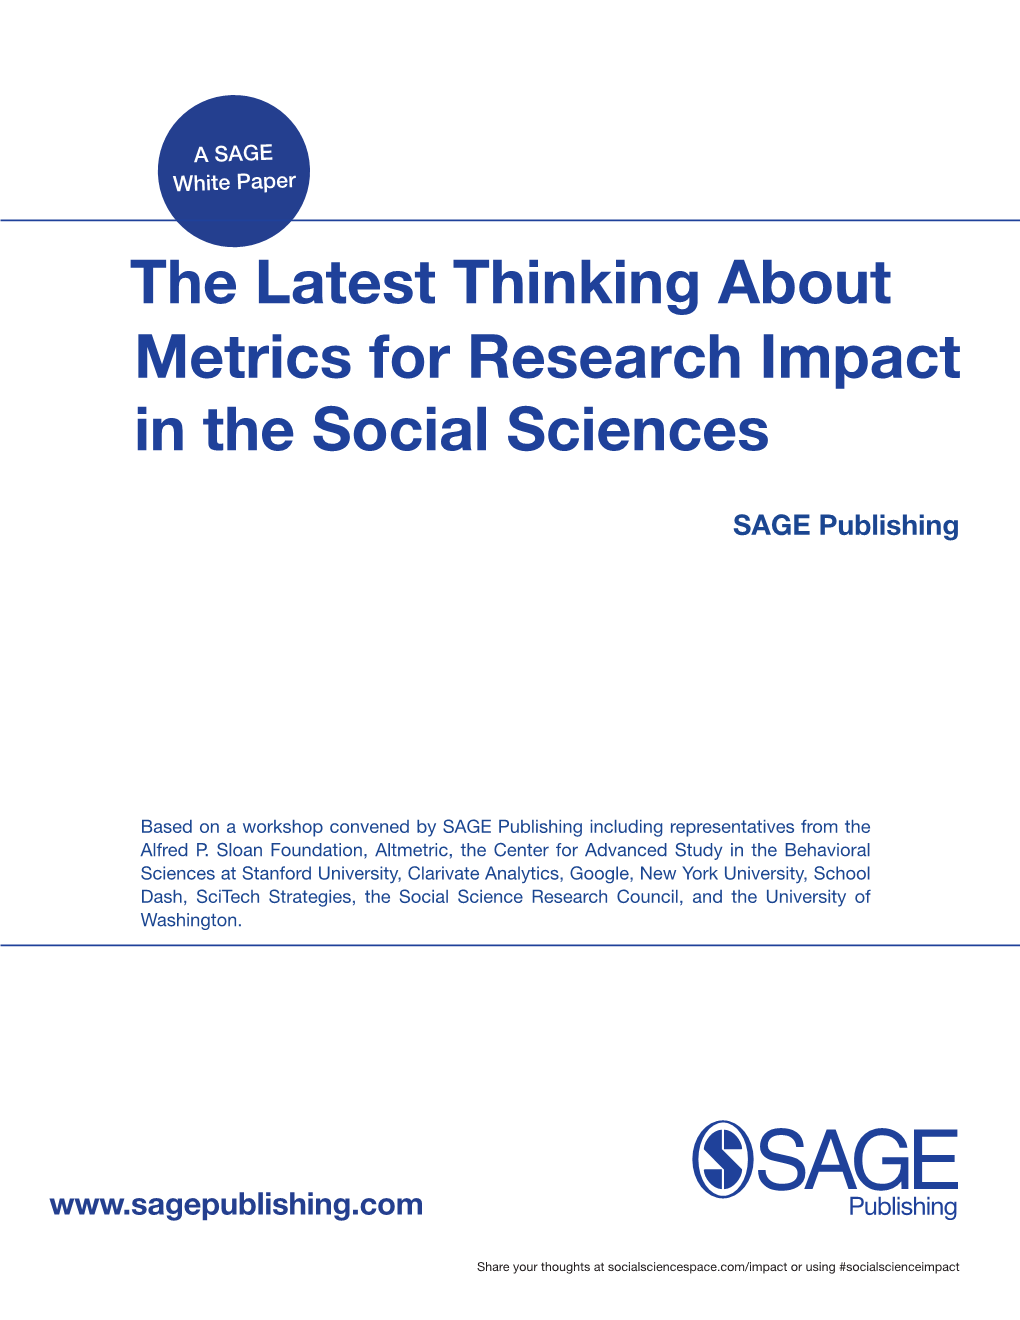 The Latest Thinking About Metrics for Research Impact in the Social Sciences (White Paper)